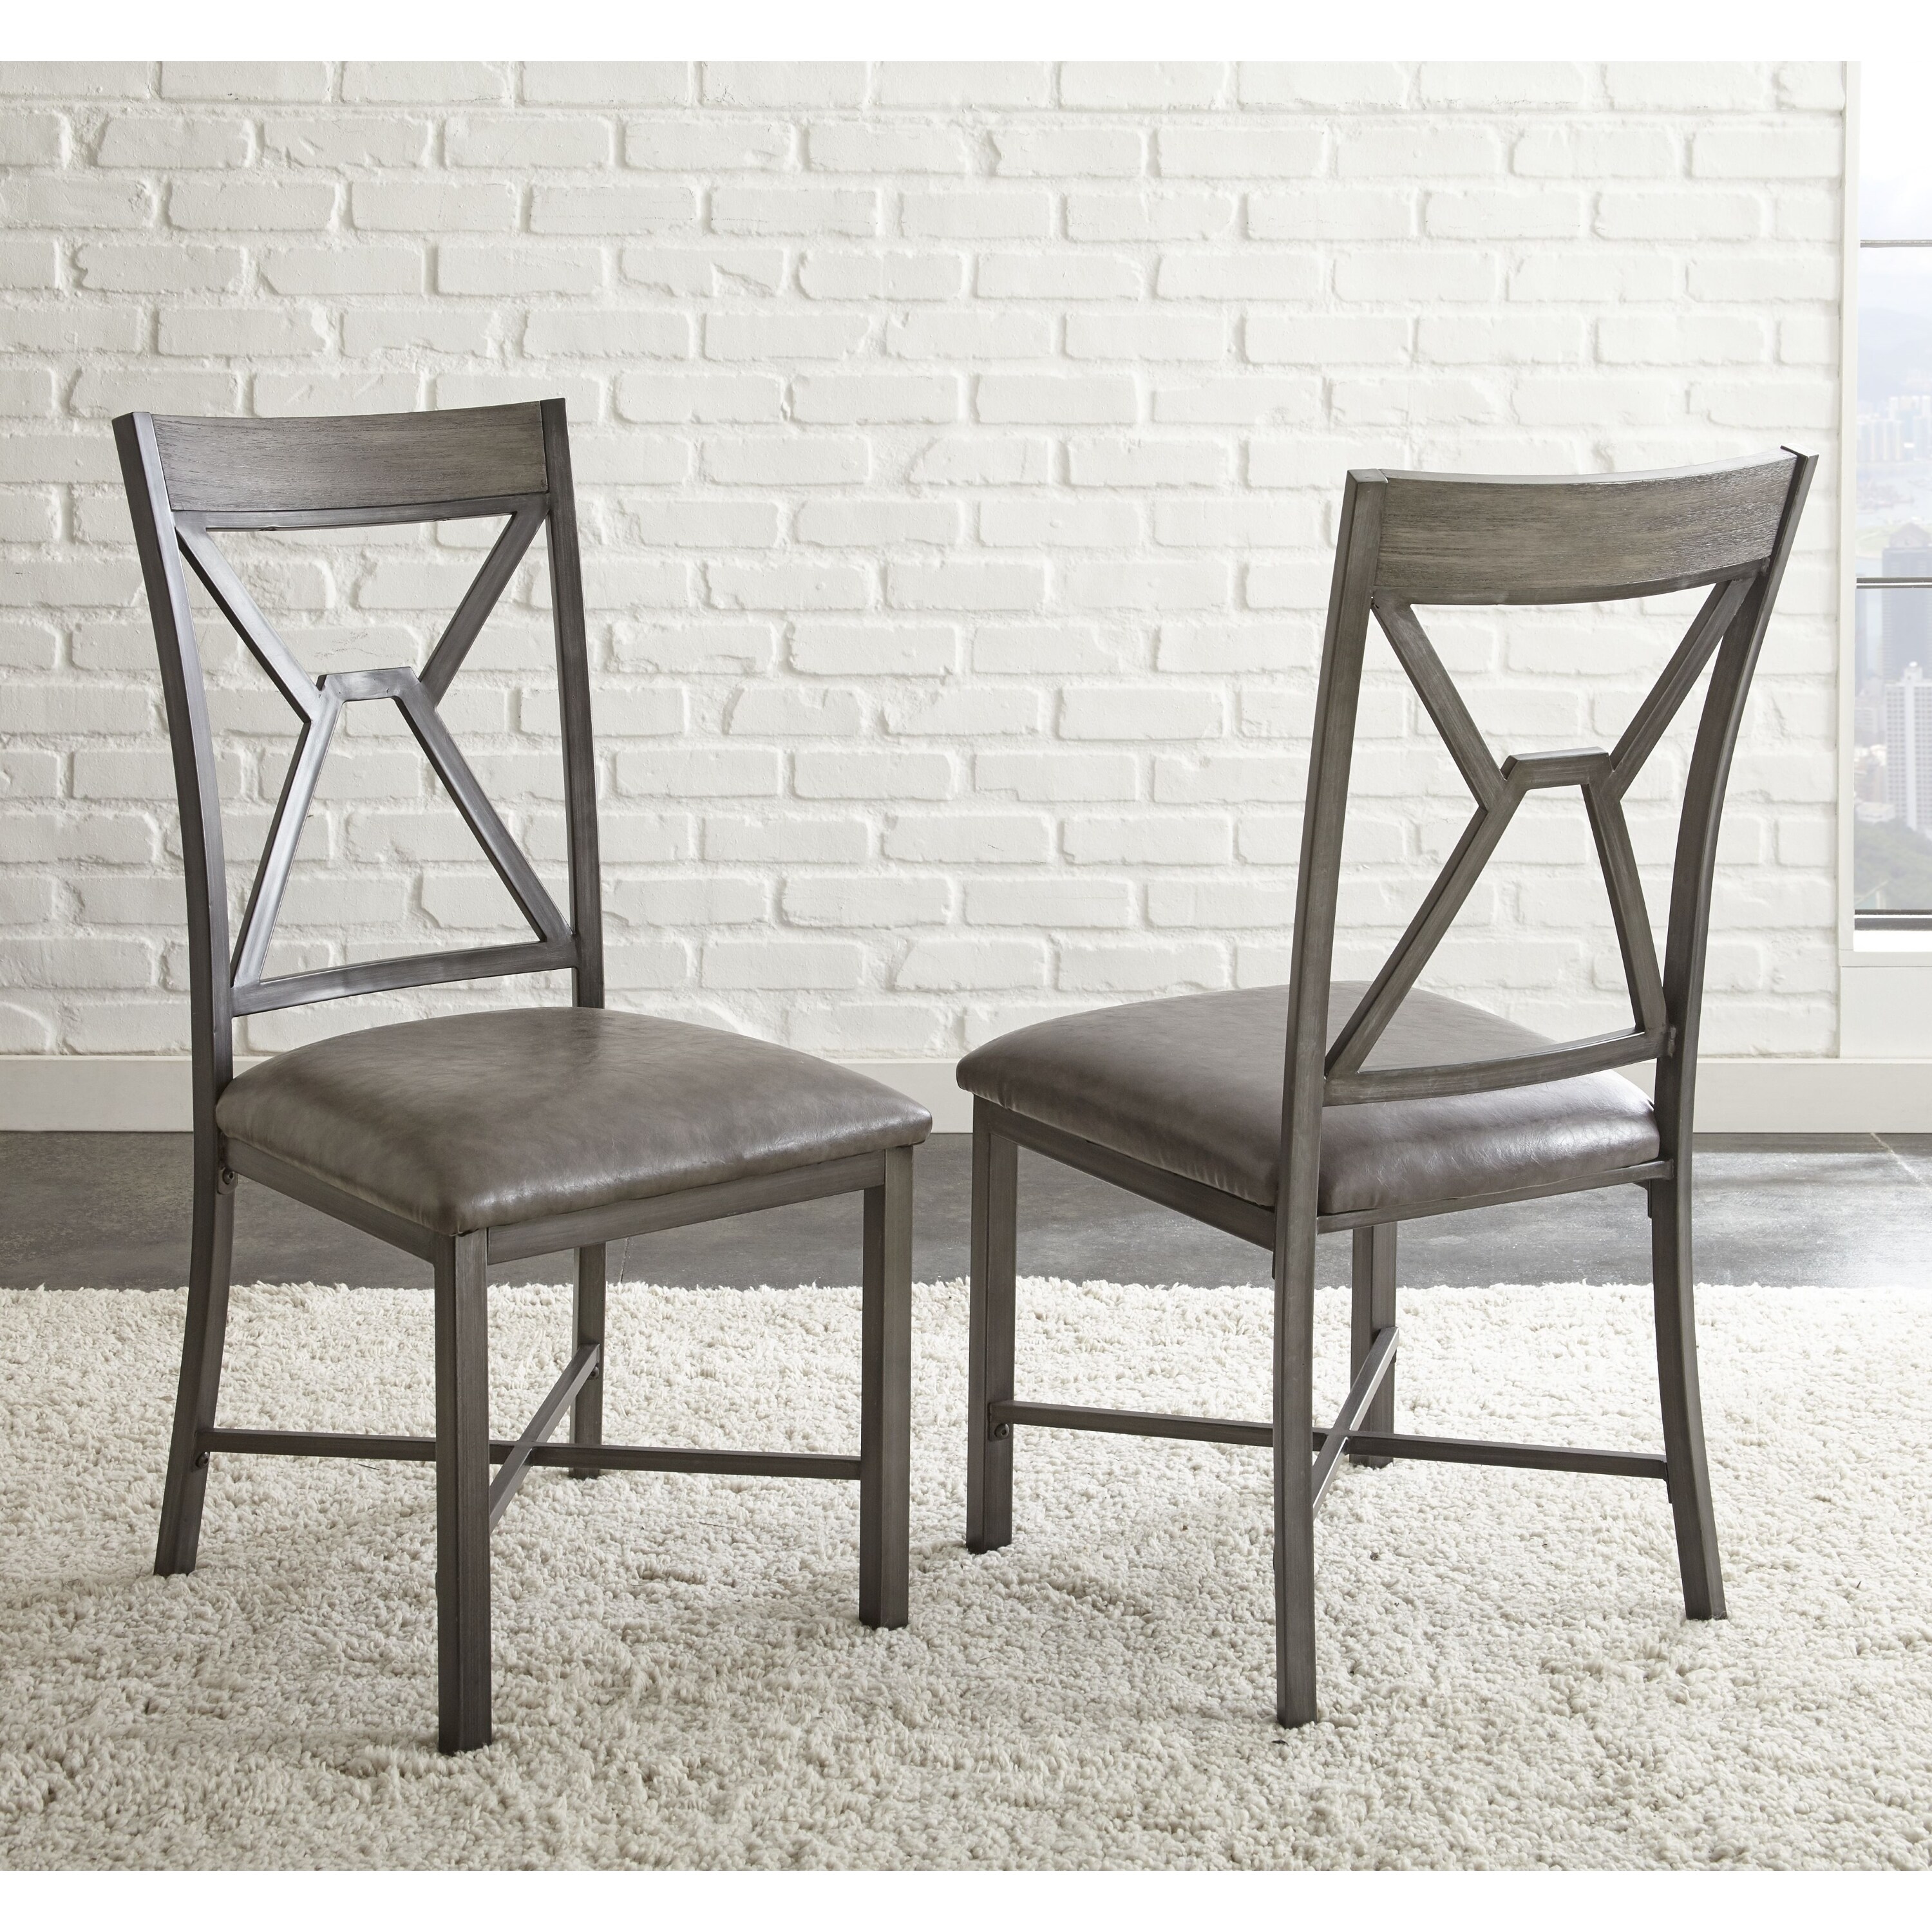 Shop Asbury Faux Leather Dining Chair Set Of 2 By Greyson Living